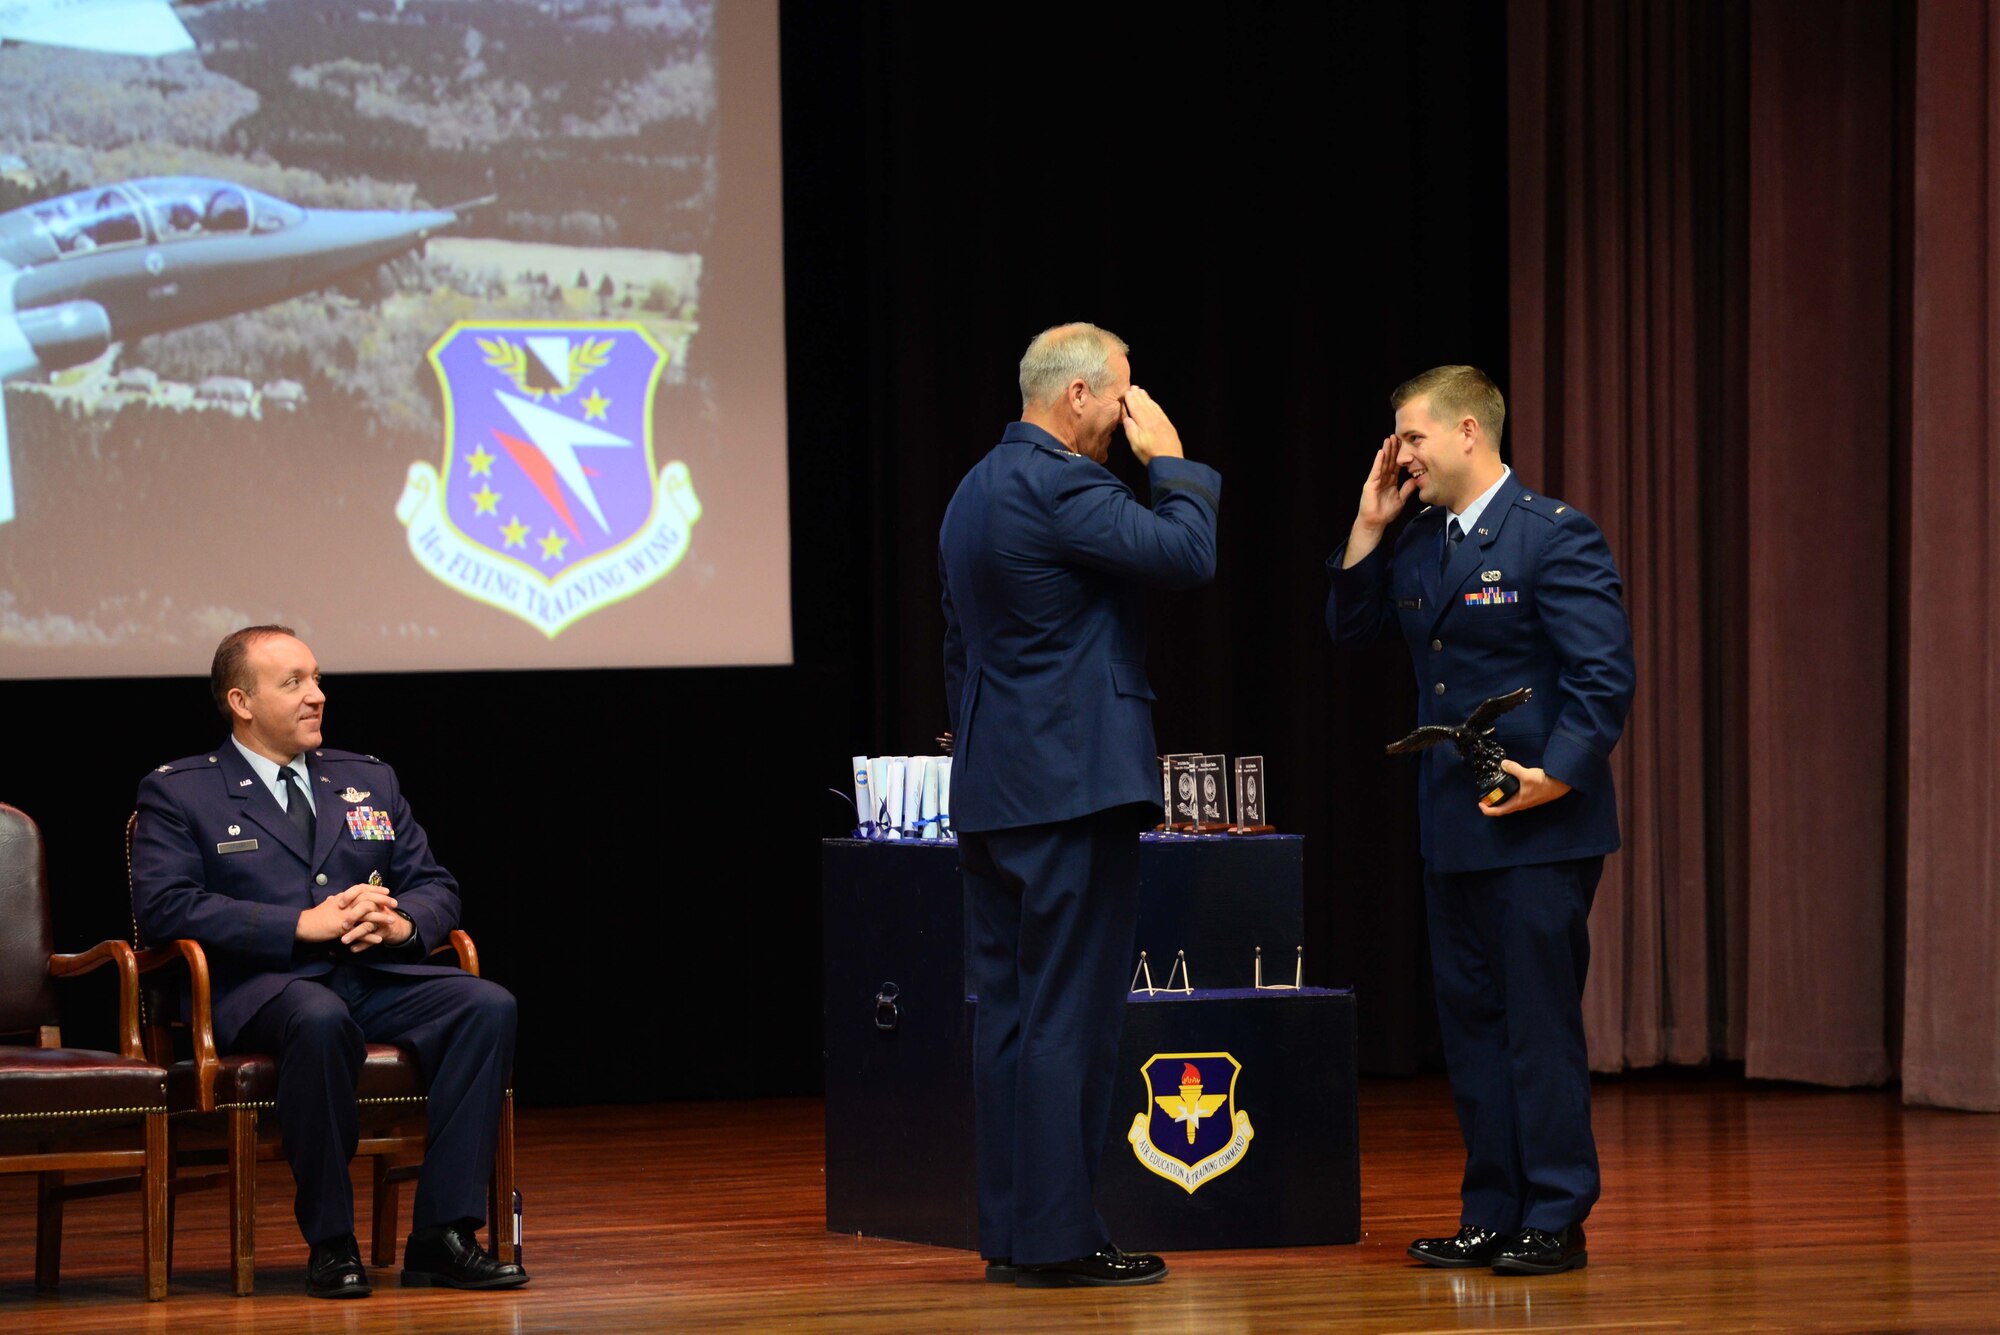 Retired Lt. Gen. Jeffrey Lofgren, former Deputy Chief of Staff for Capability Development, salutes 2nd Lt. Logan Adcock, Sept. 13, 2019, on Columbus Air Force Base, Mississippi. Lofgren presented three graduates the Air Education and Training Command Commander’s Trophy for being the most outstanding students overall in their classes. (U.S. Air Force photo by Airman 1st Class Jake Jacobsen)